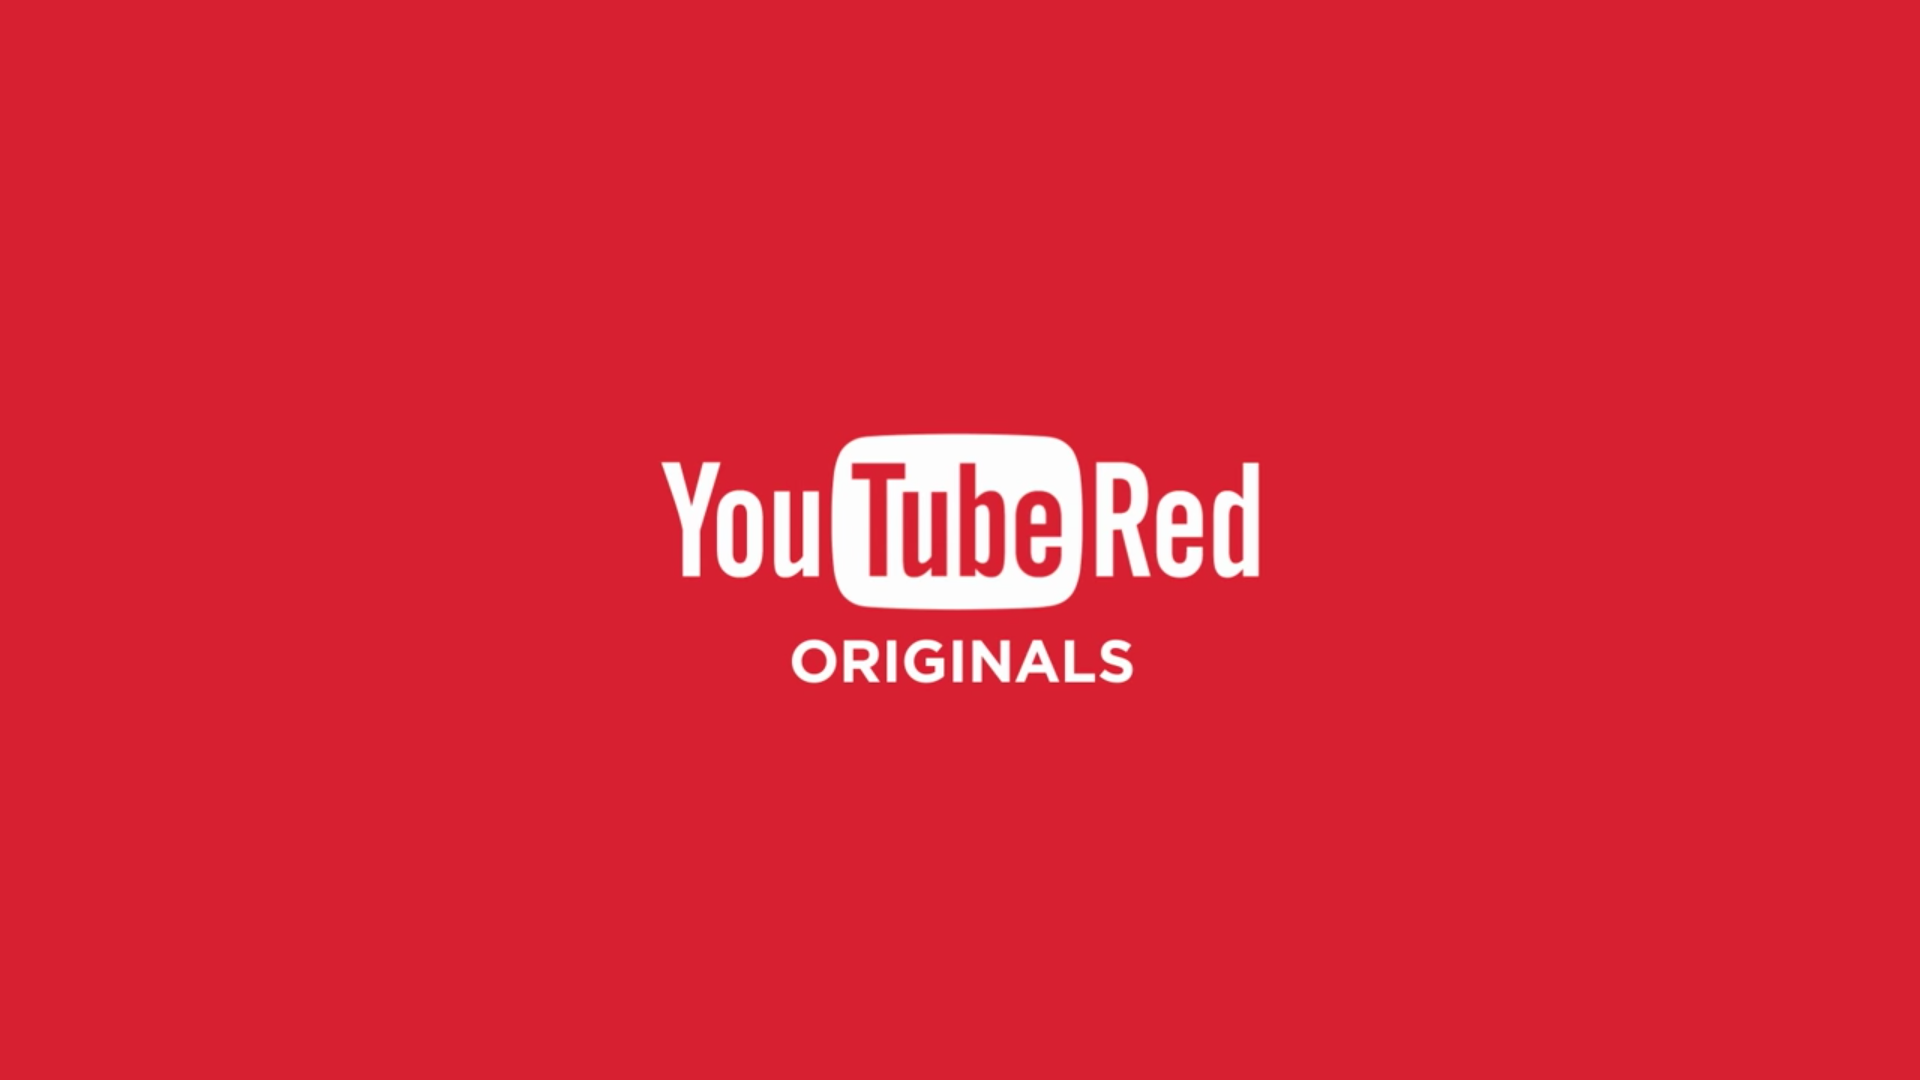 YouTube Red Originals. Photo by: YouTube